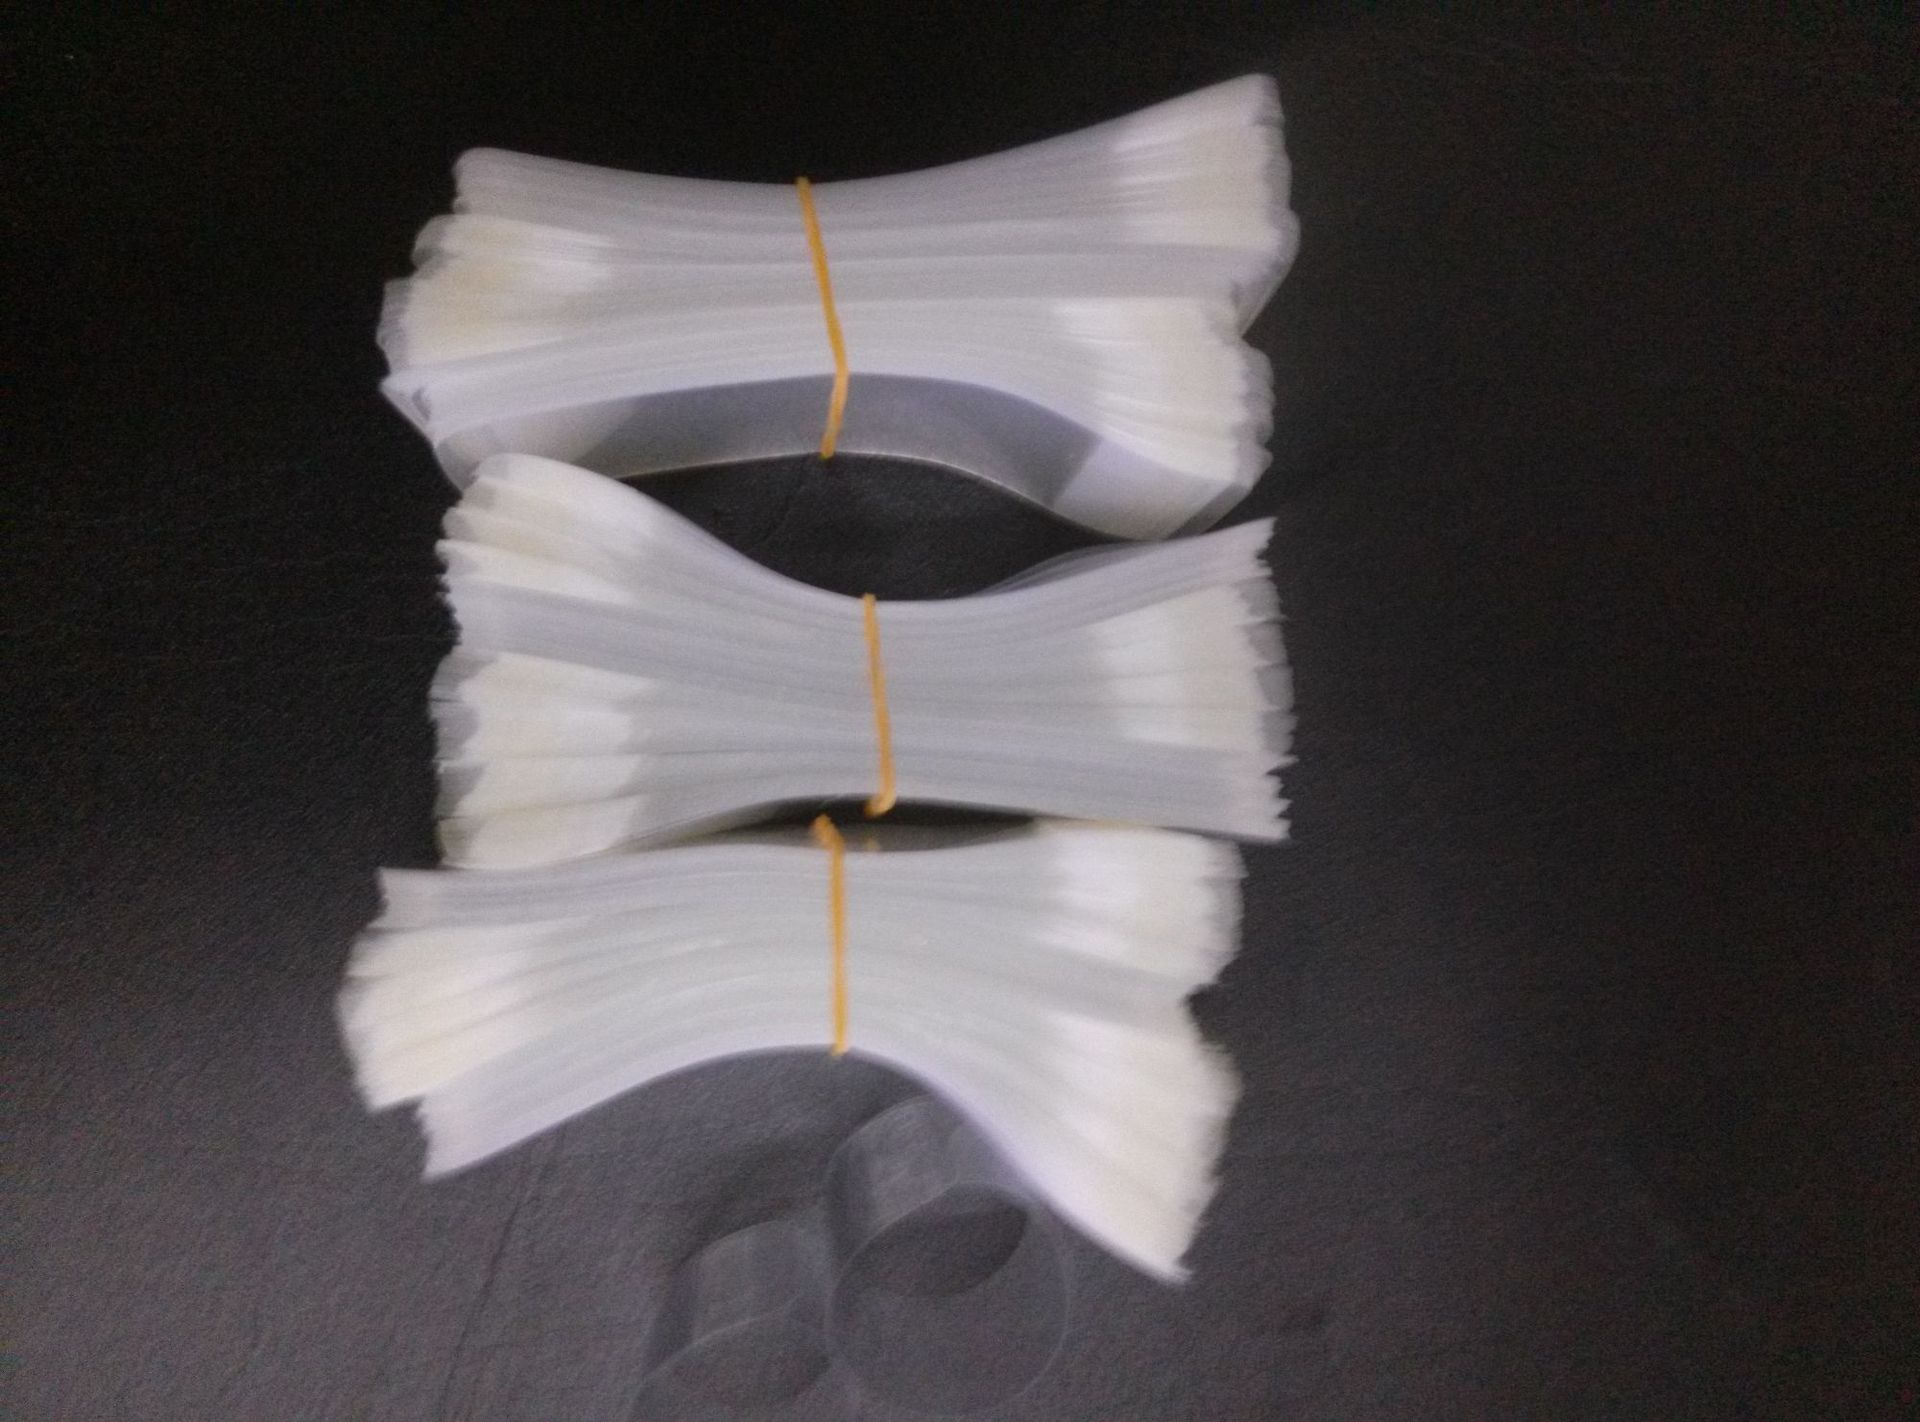 Packaging opp strapping tape Data cable straps Film Ligature Electronics product Customization of binding straps